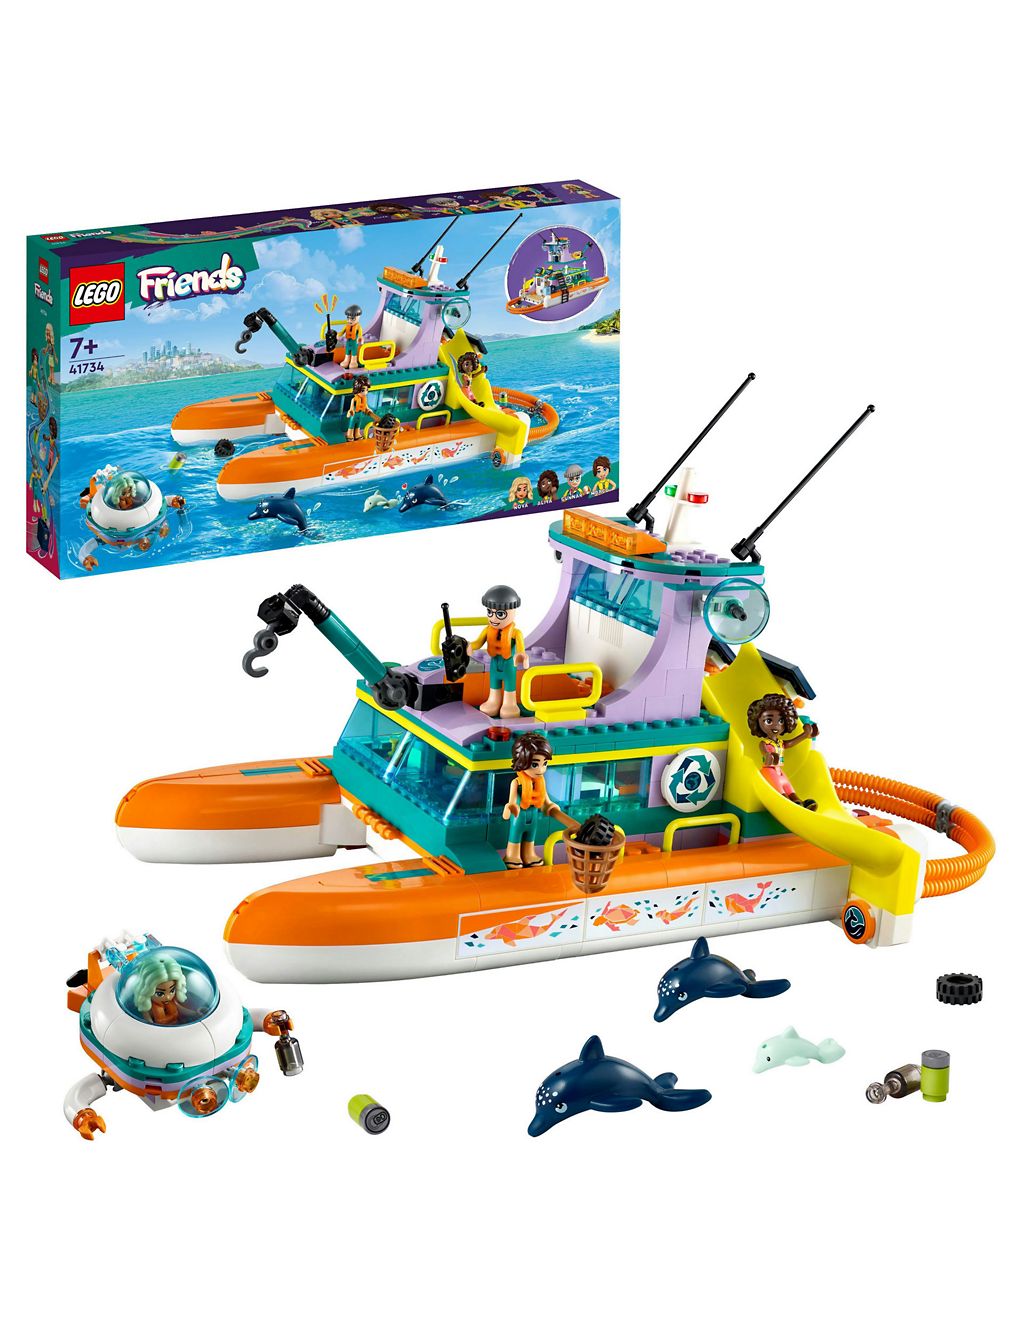 LEGO Friends Sea Rescue Boat Toy Playset 41734 (7+ Yrs) 3 of 6